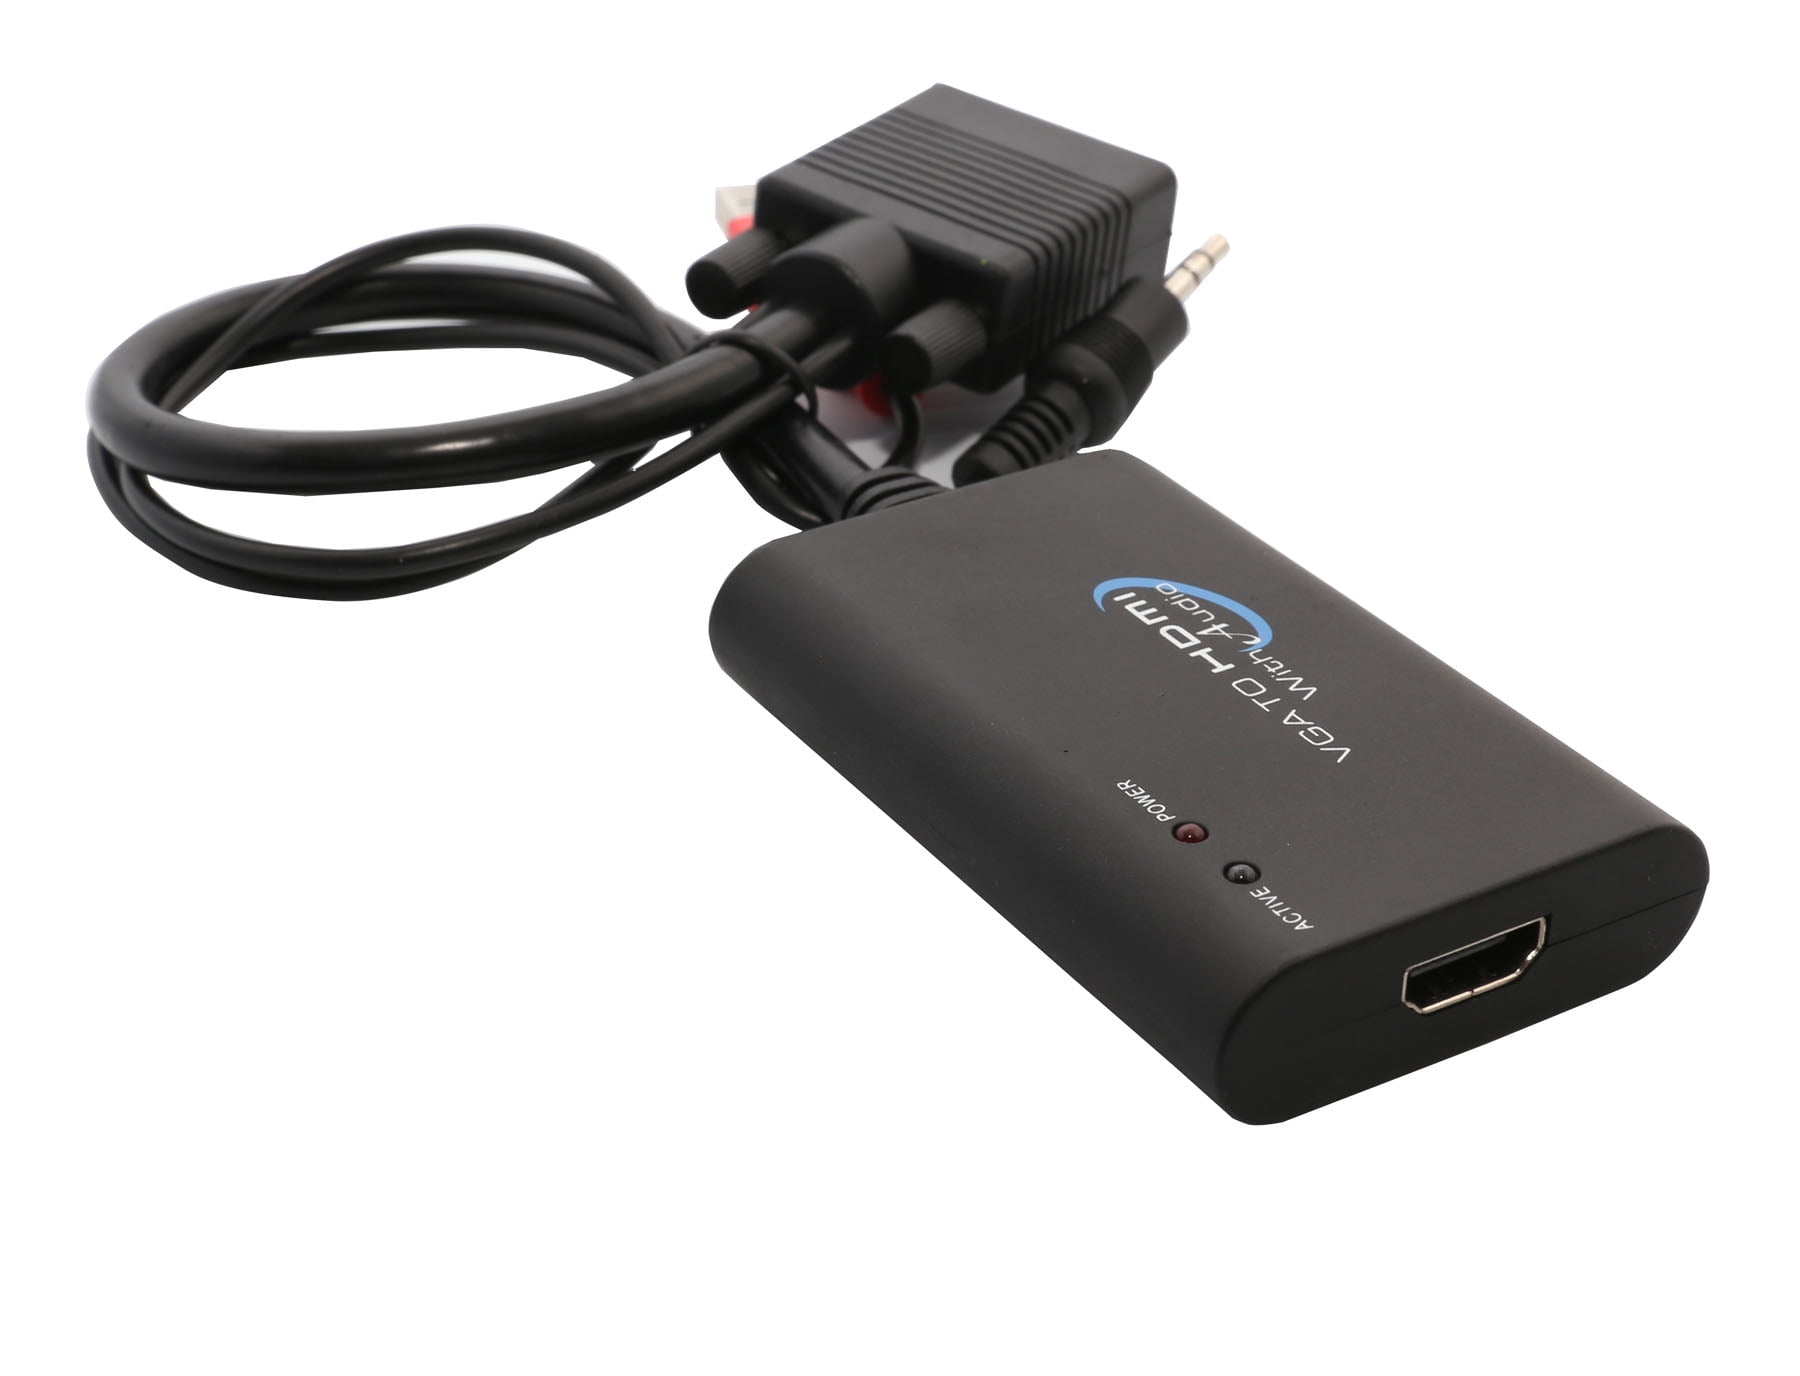 Syba VGA to HDMI Convertor with Audio support (SY-ADA31025) FREE Reusable Oblanc Tote - Walmart.com